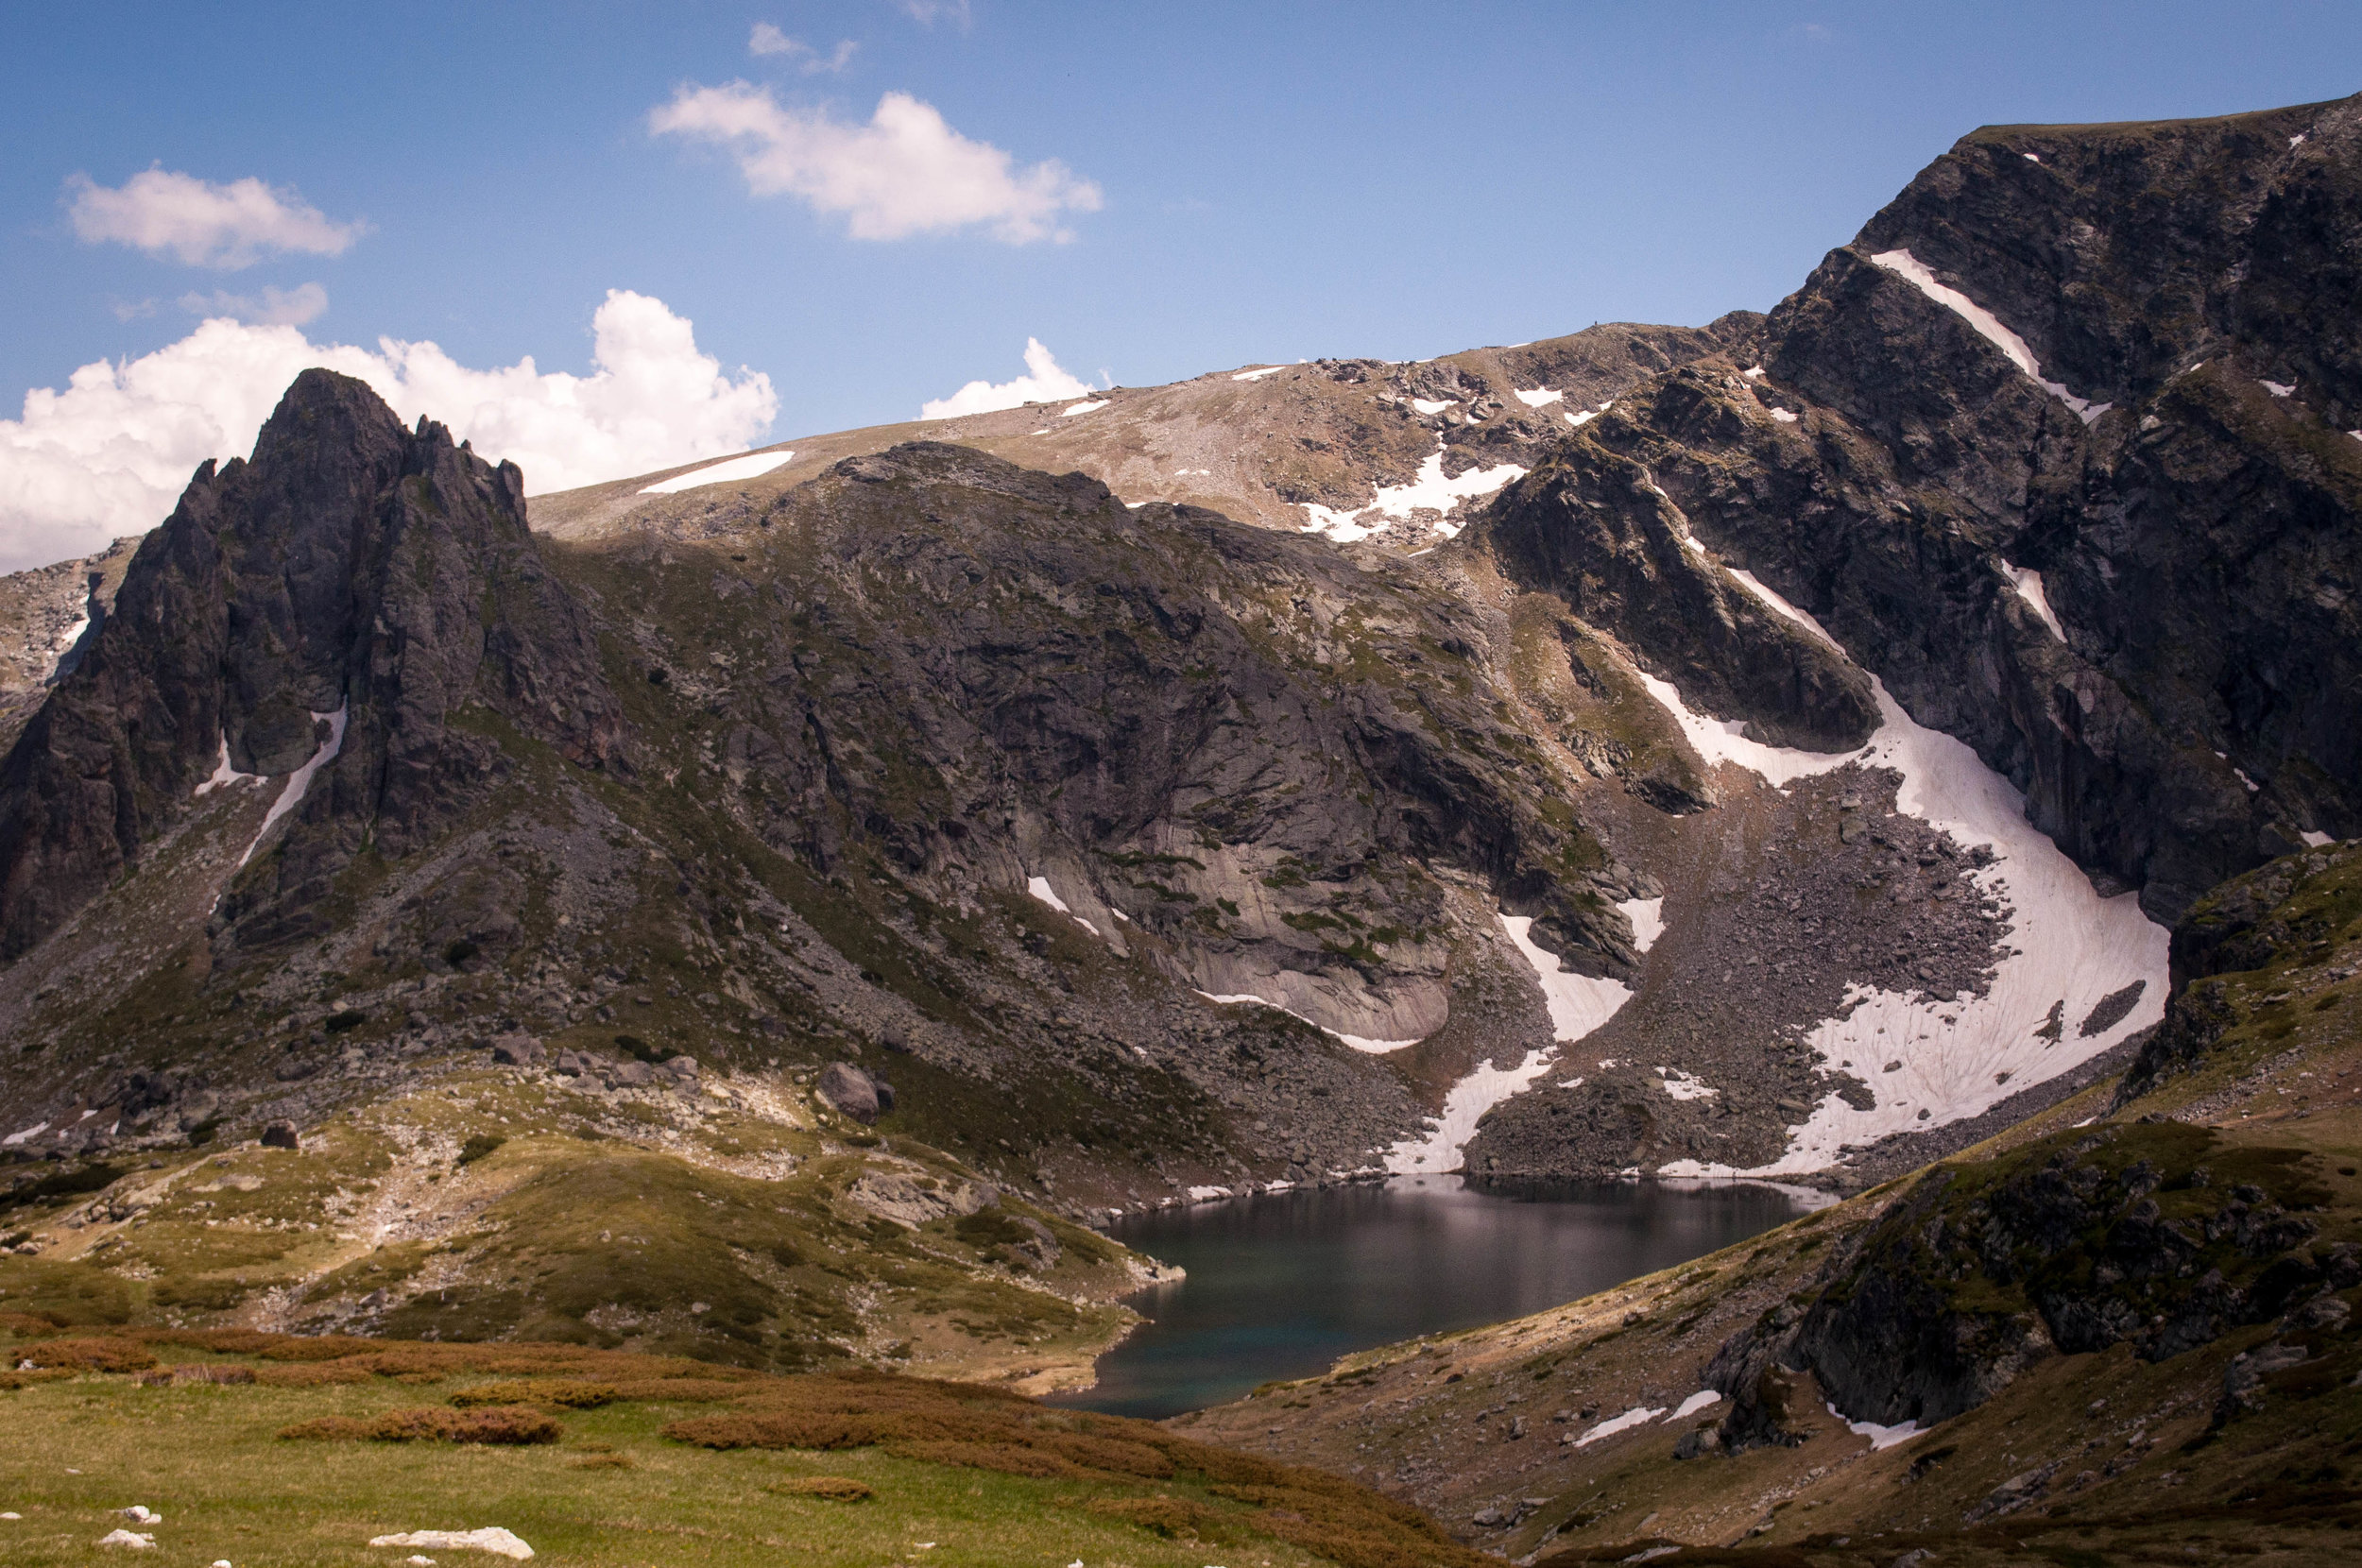 Seven Rila Lakes,  this was one of our stops in our Road trip in Bulgaria